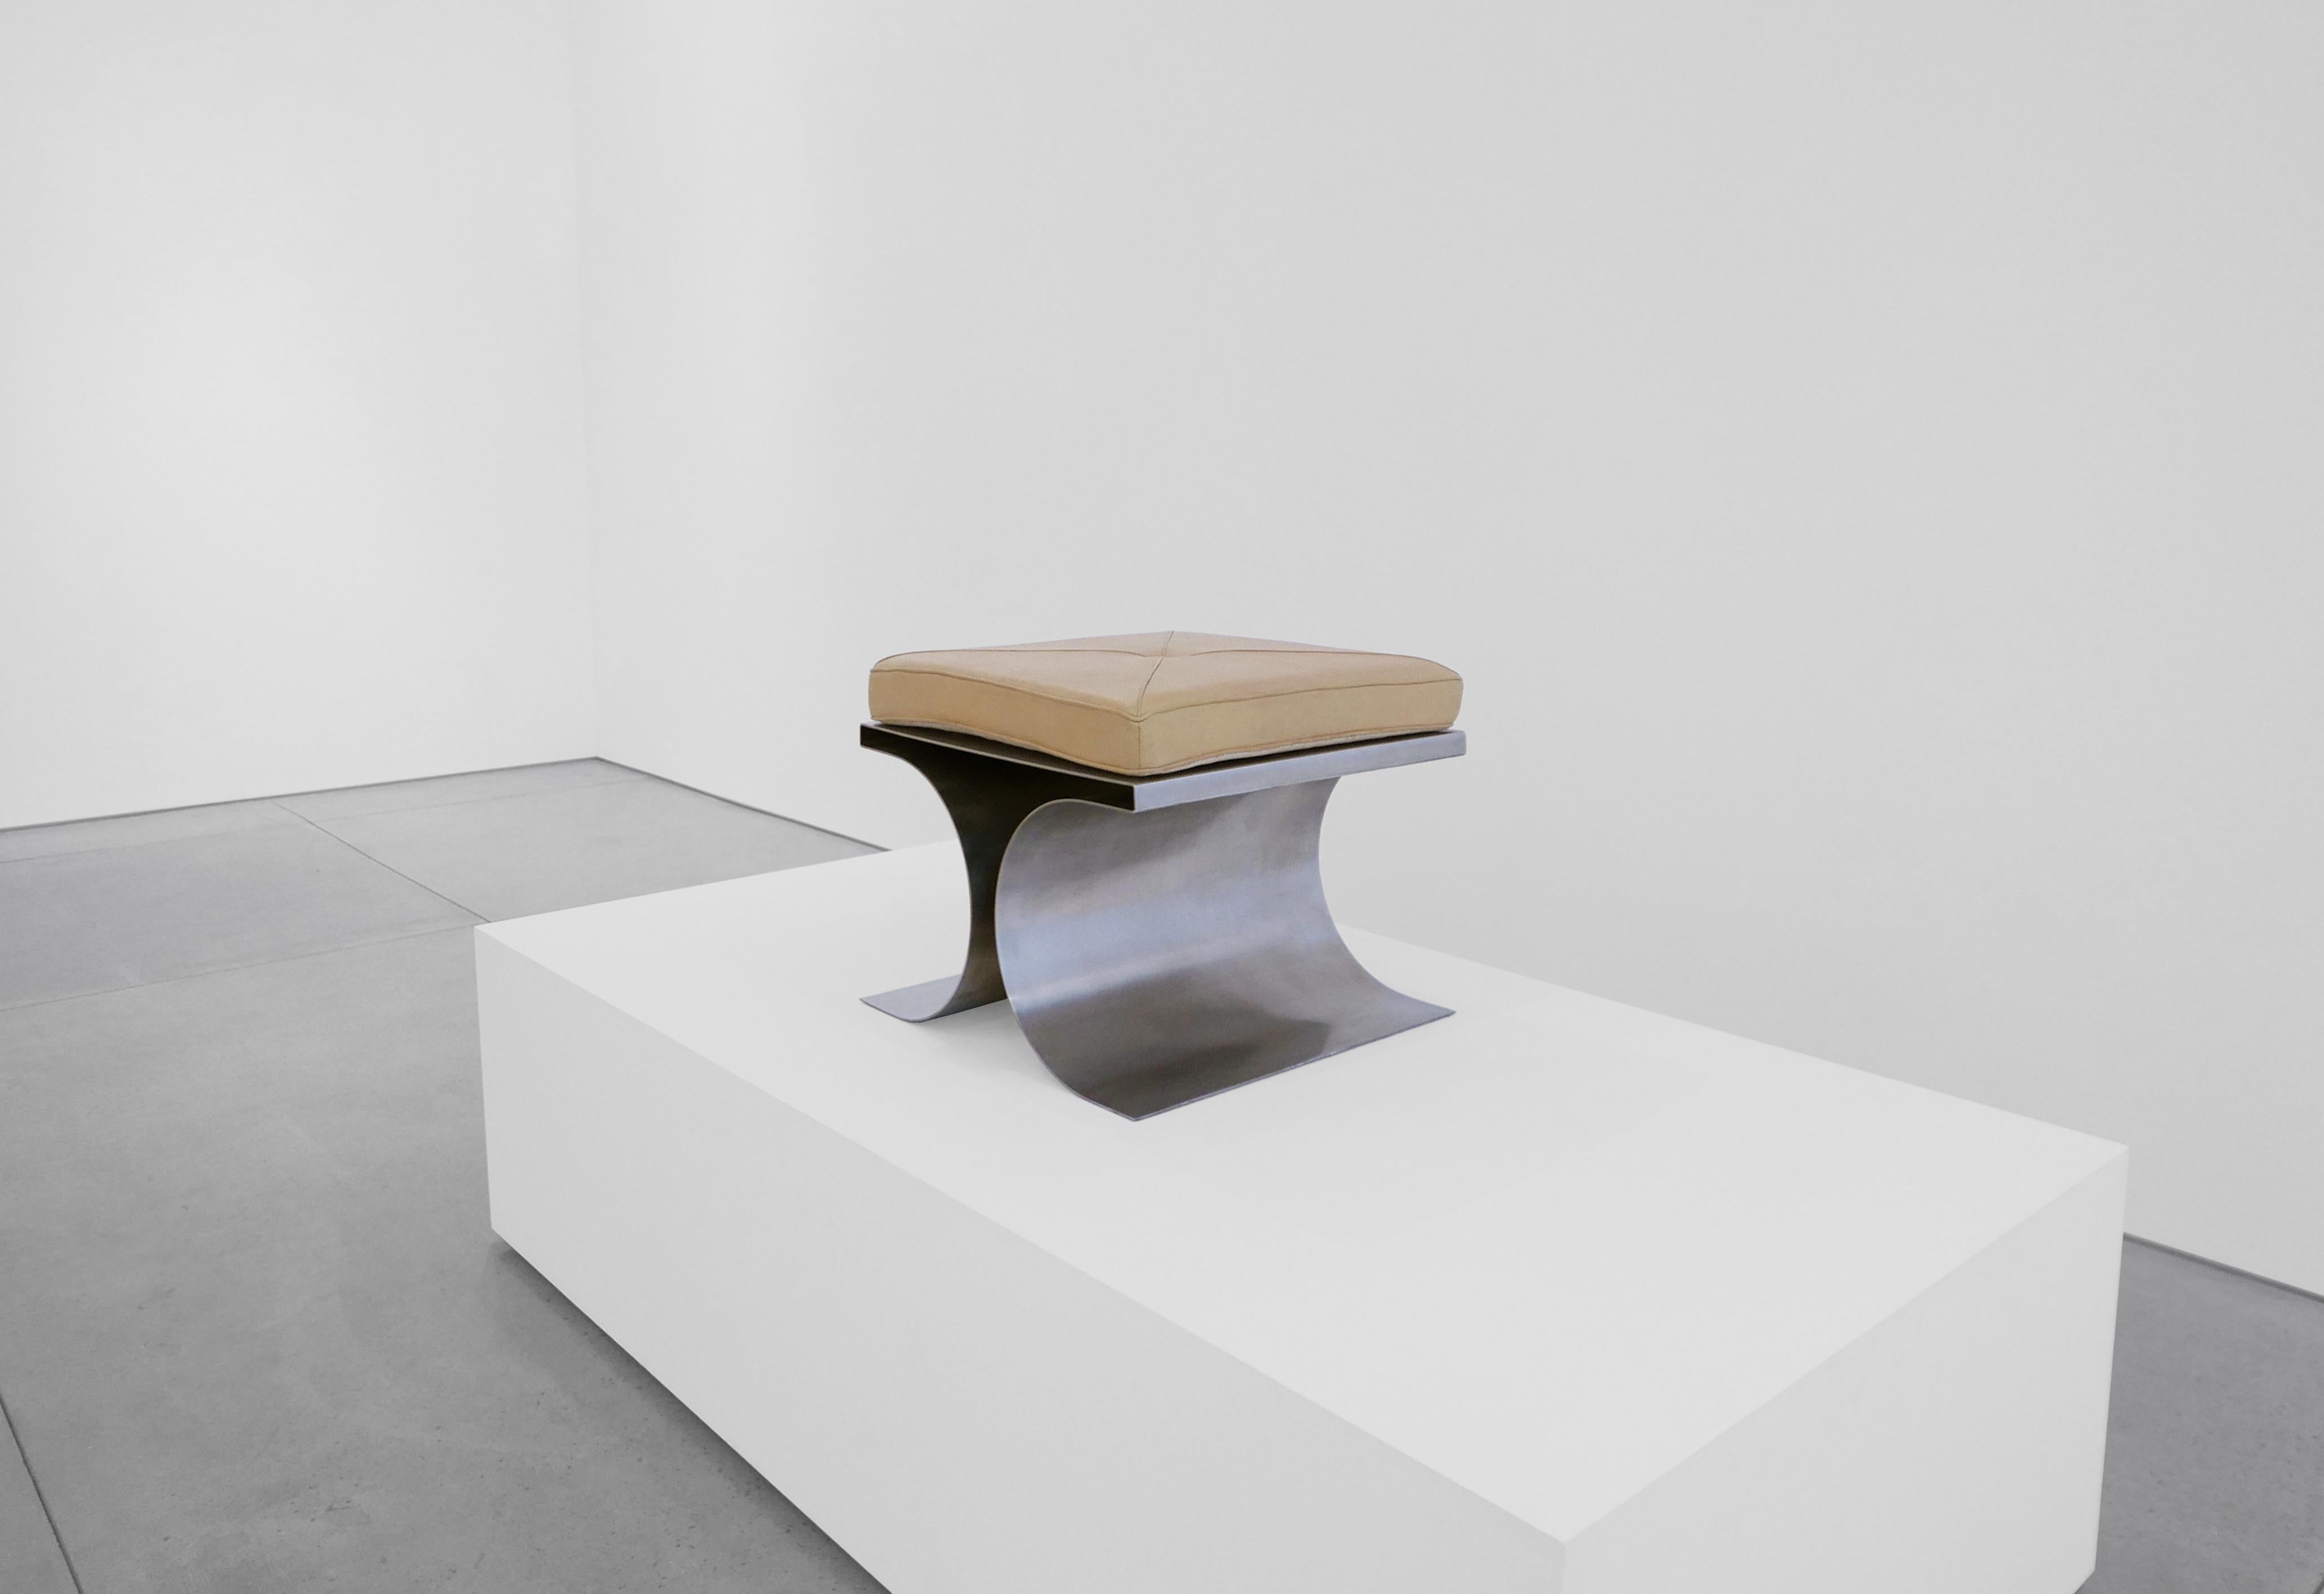 Michel Boyer
'X' stool, circa 1968
Stainless steel, leather
Measure: 16 H x 19.75 W x 19.75 D inches.
 